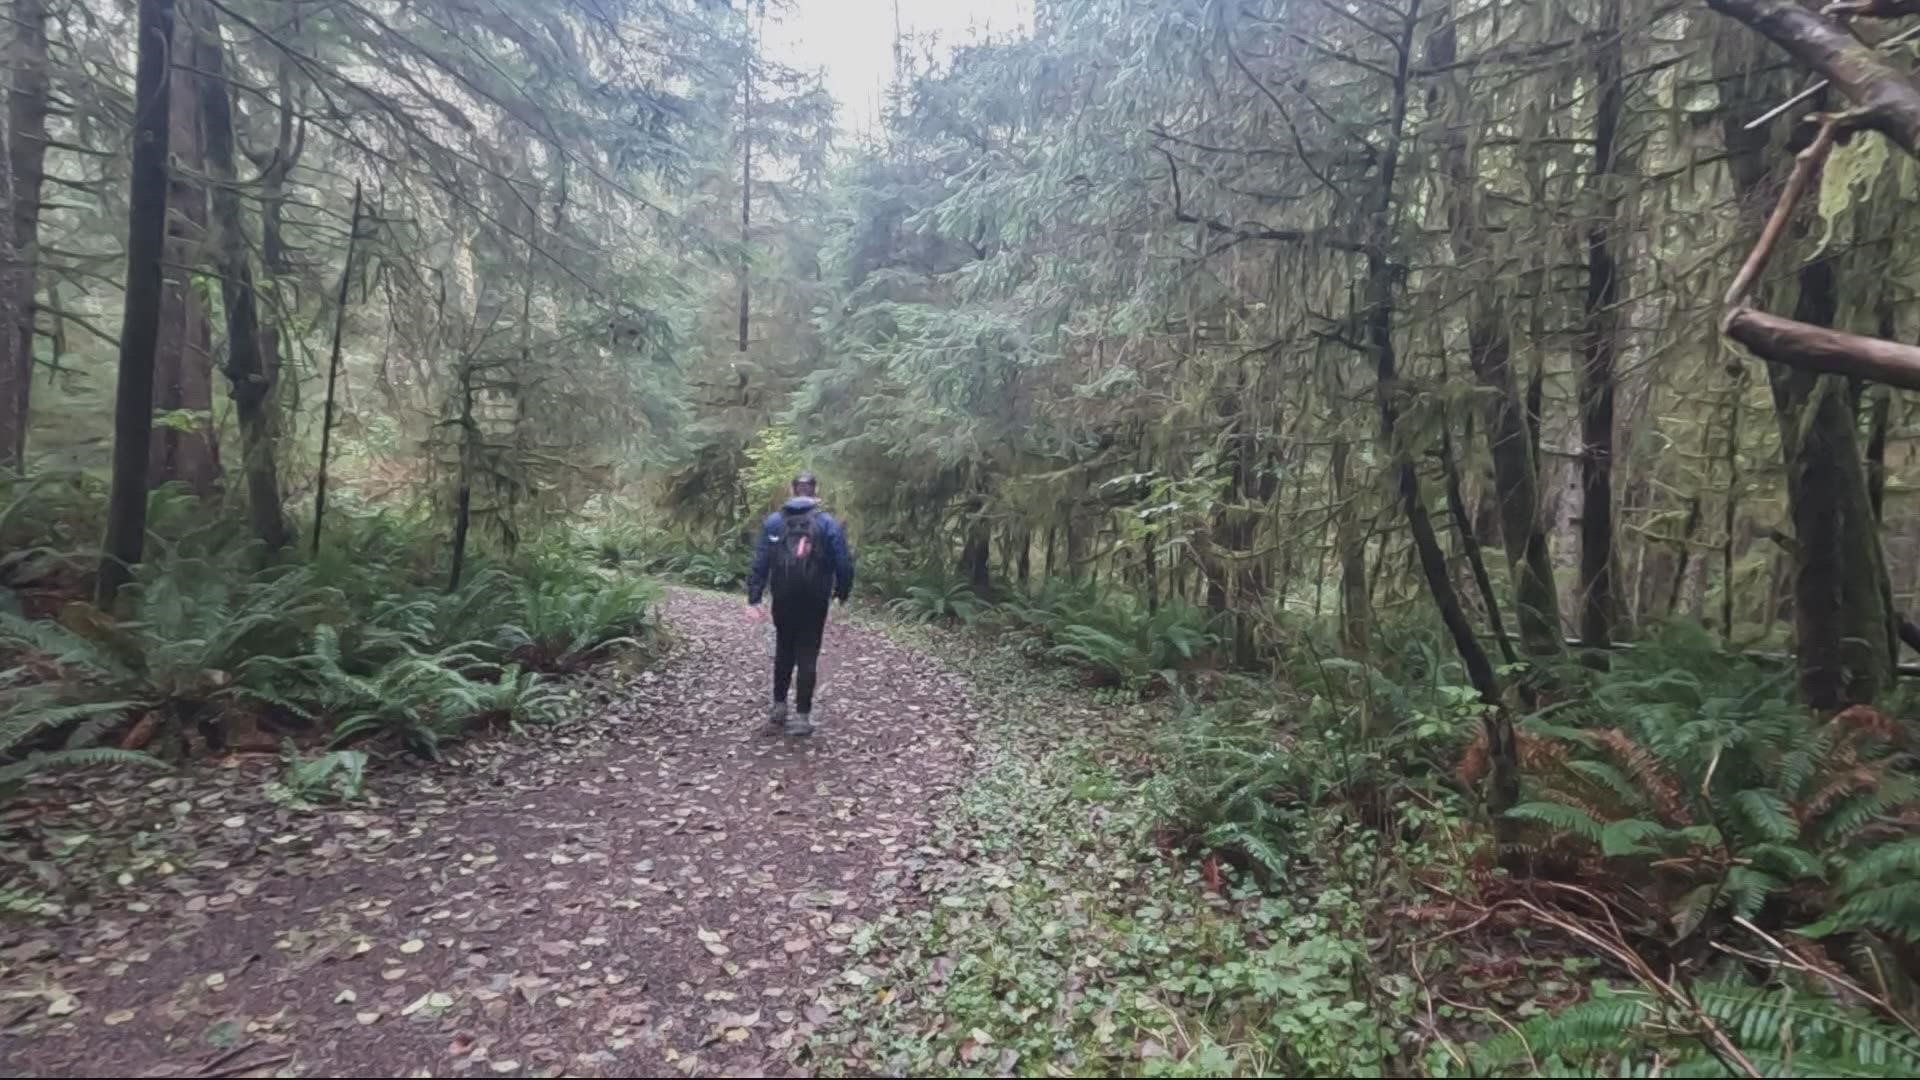 The Clatsop Loop at Ecola State Park has been featured in four movies due to the eerie setting. Legend has it that the area is haunted, to boot